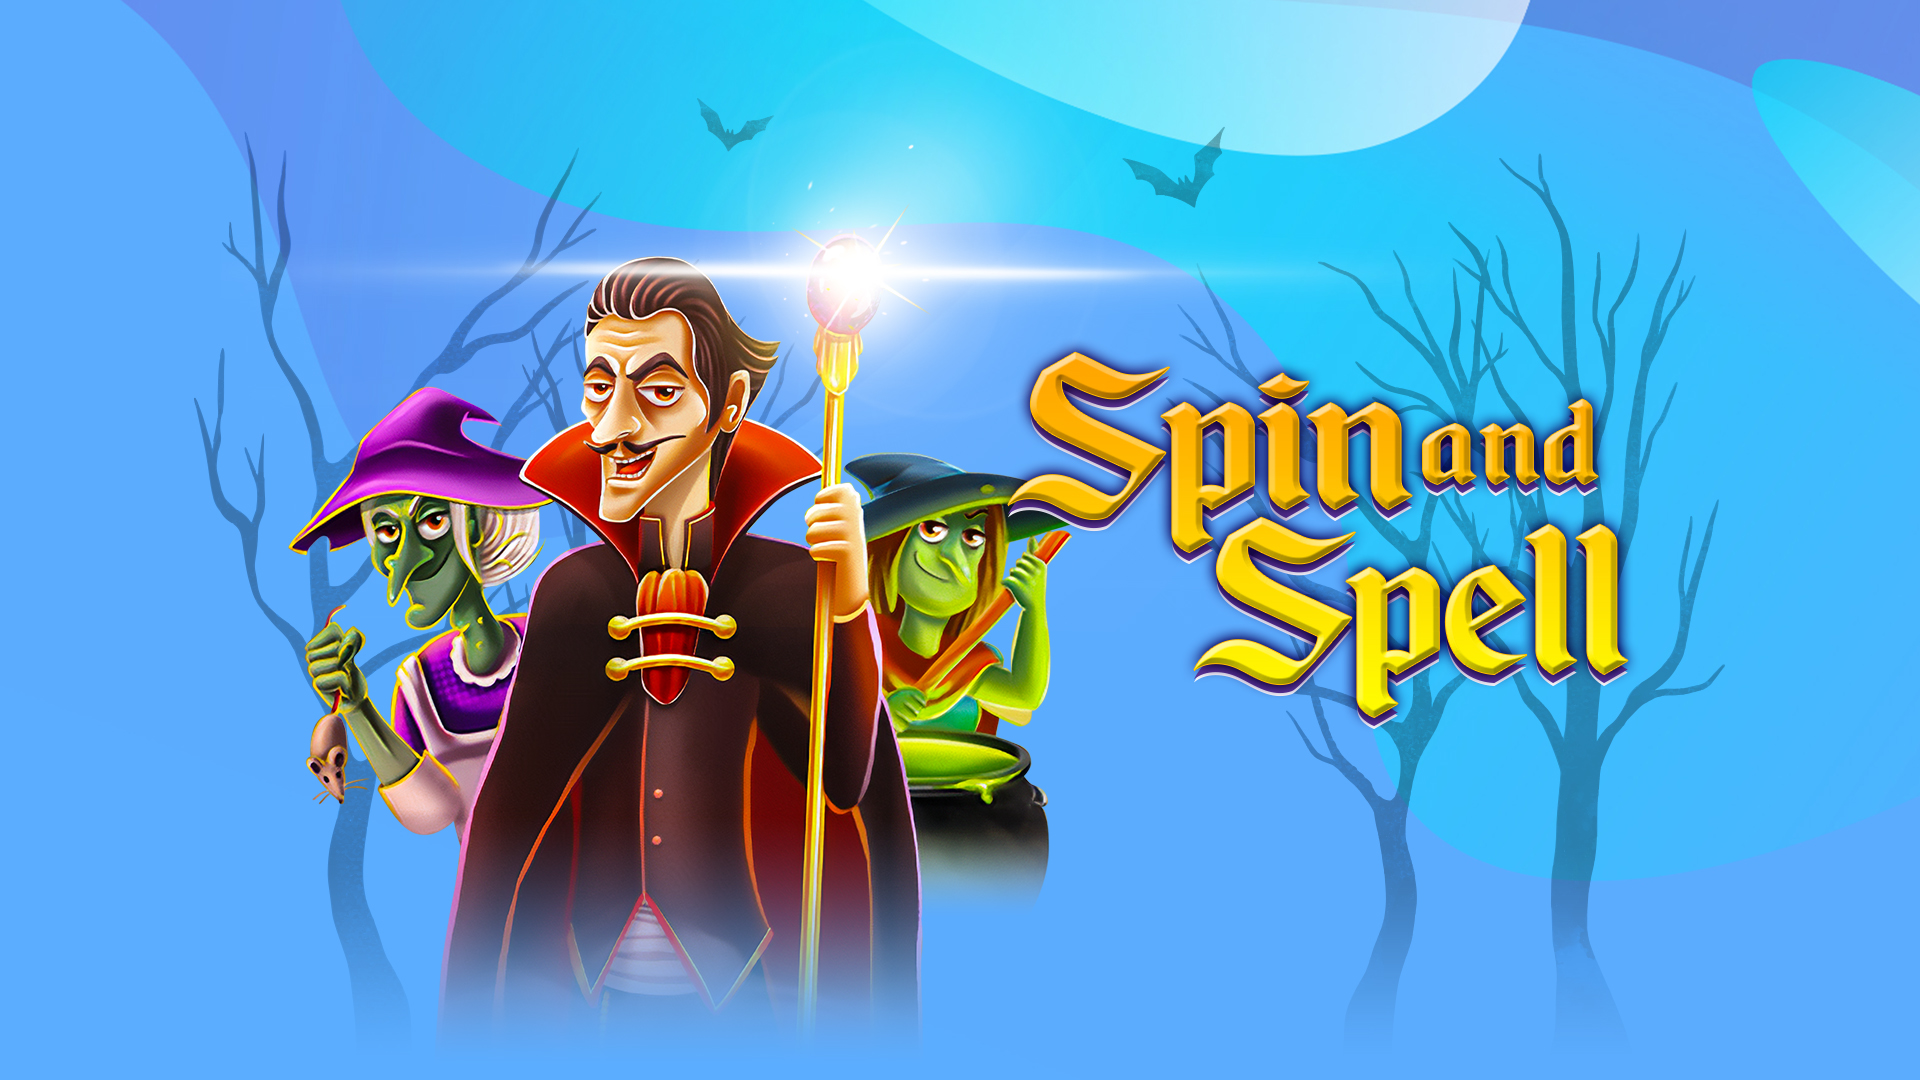 Cartoon witches and a wizard flanked by trees with the logo from the SlotsLV slots game, Spin and Spell, against a blue background.